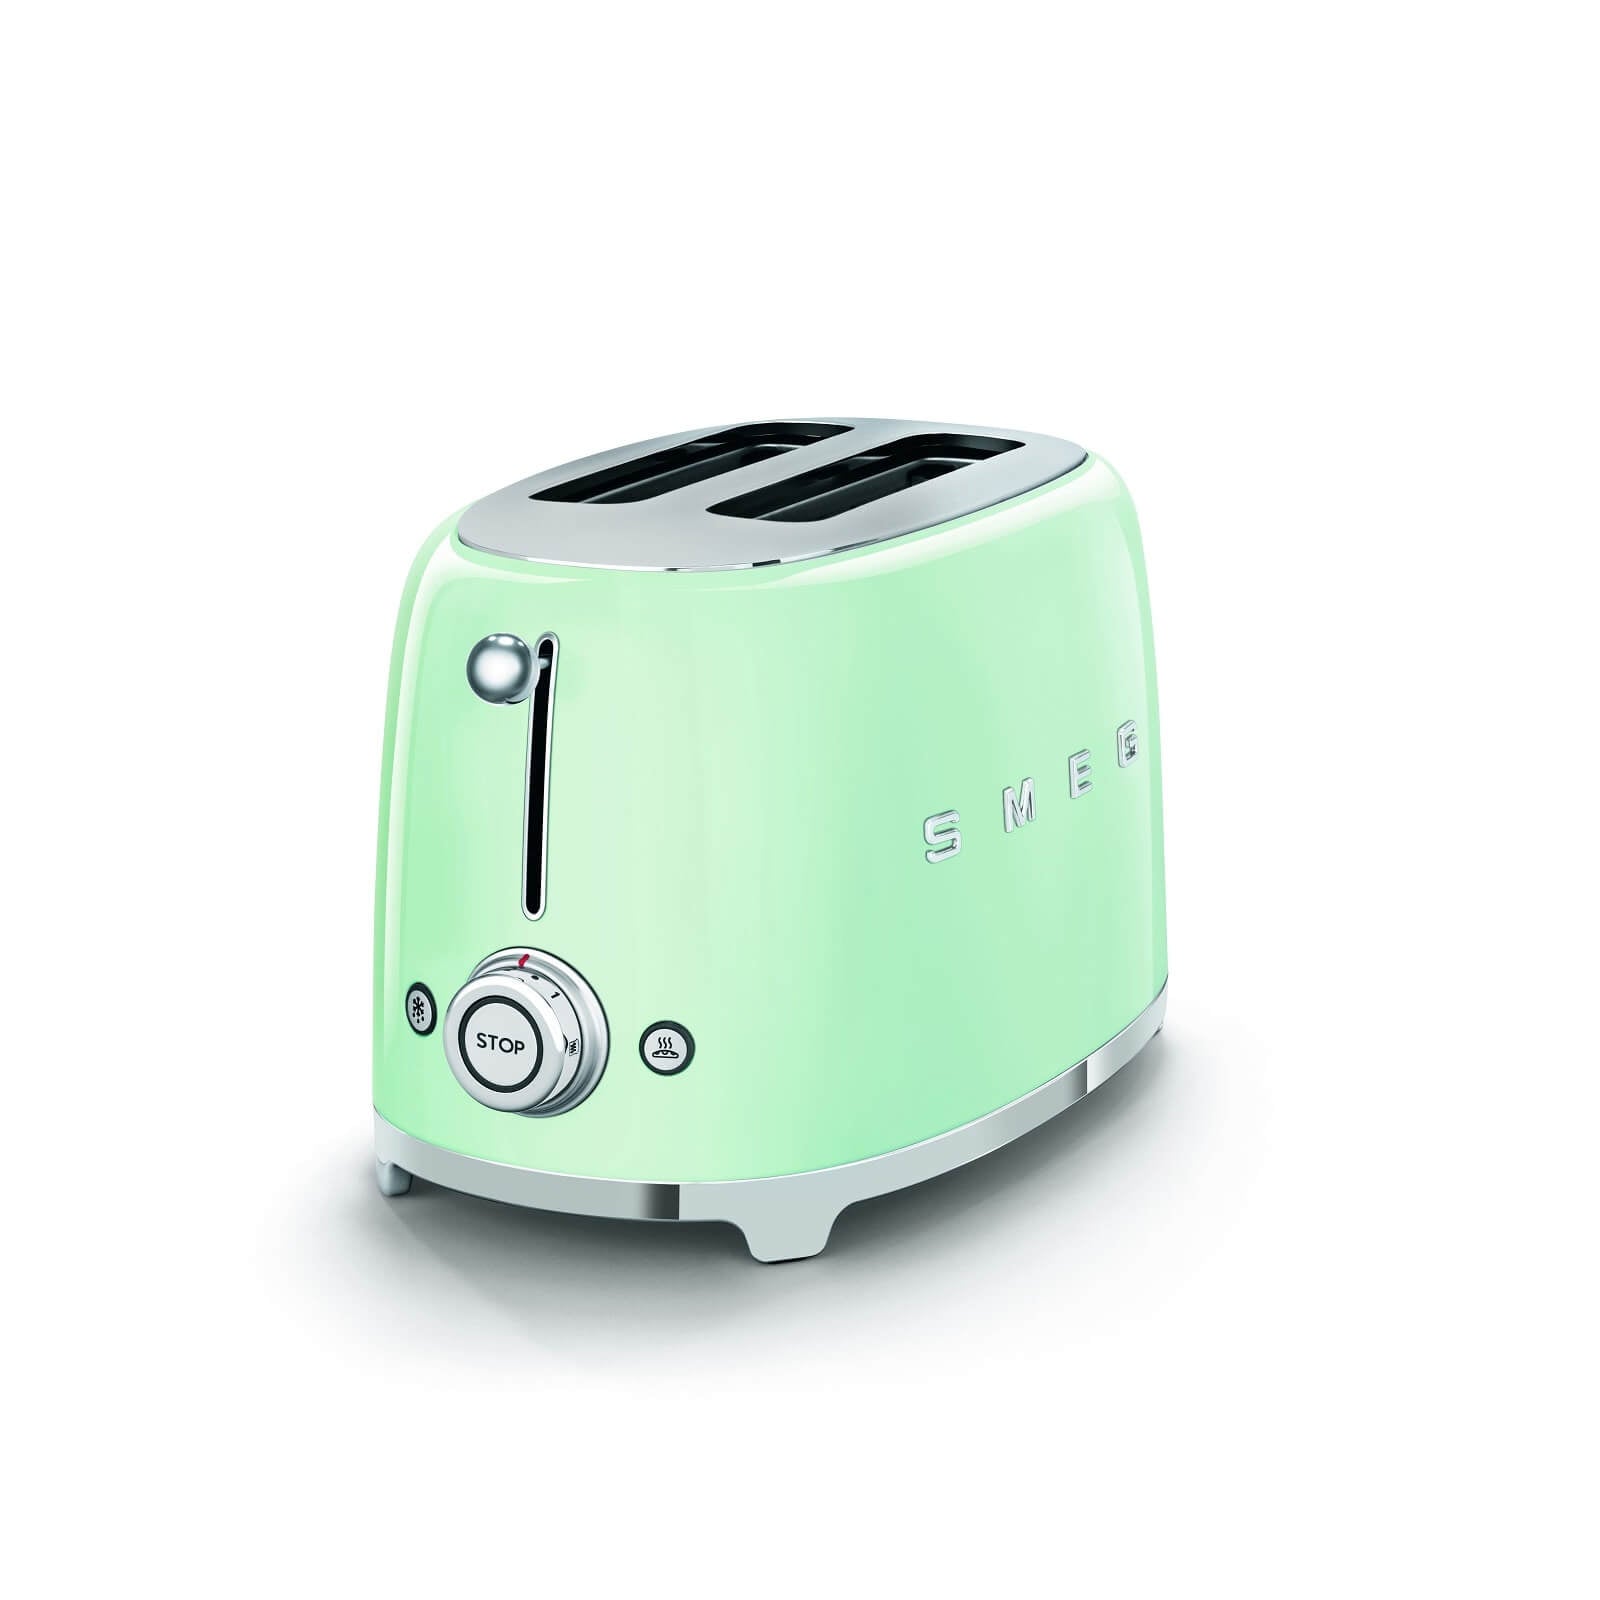 SMEG 50's Style 2 Slice Toaster - Pastel Green Color